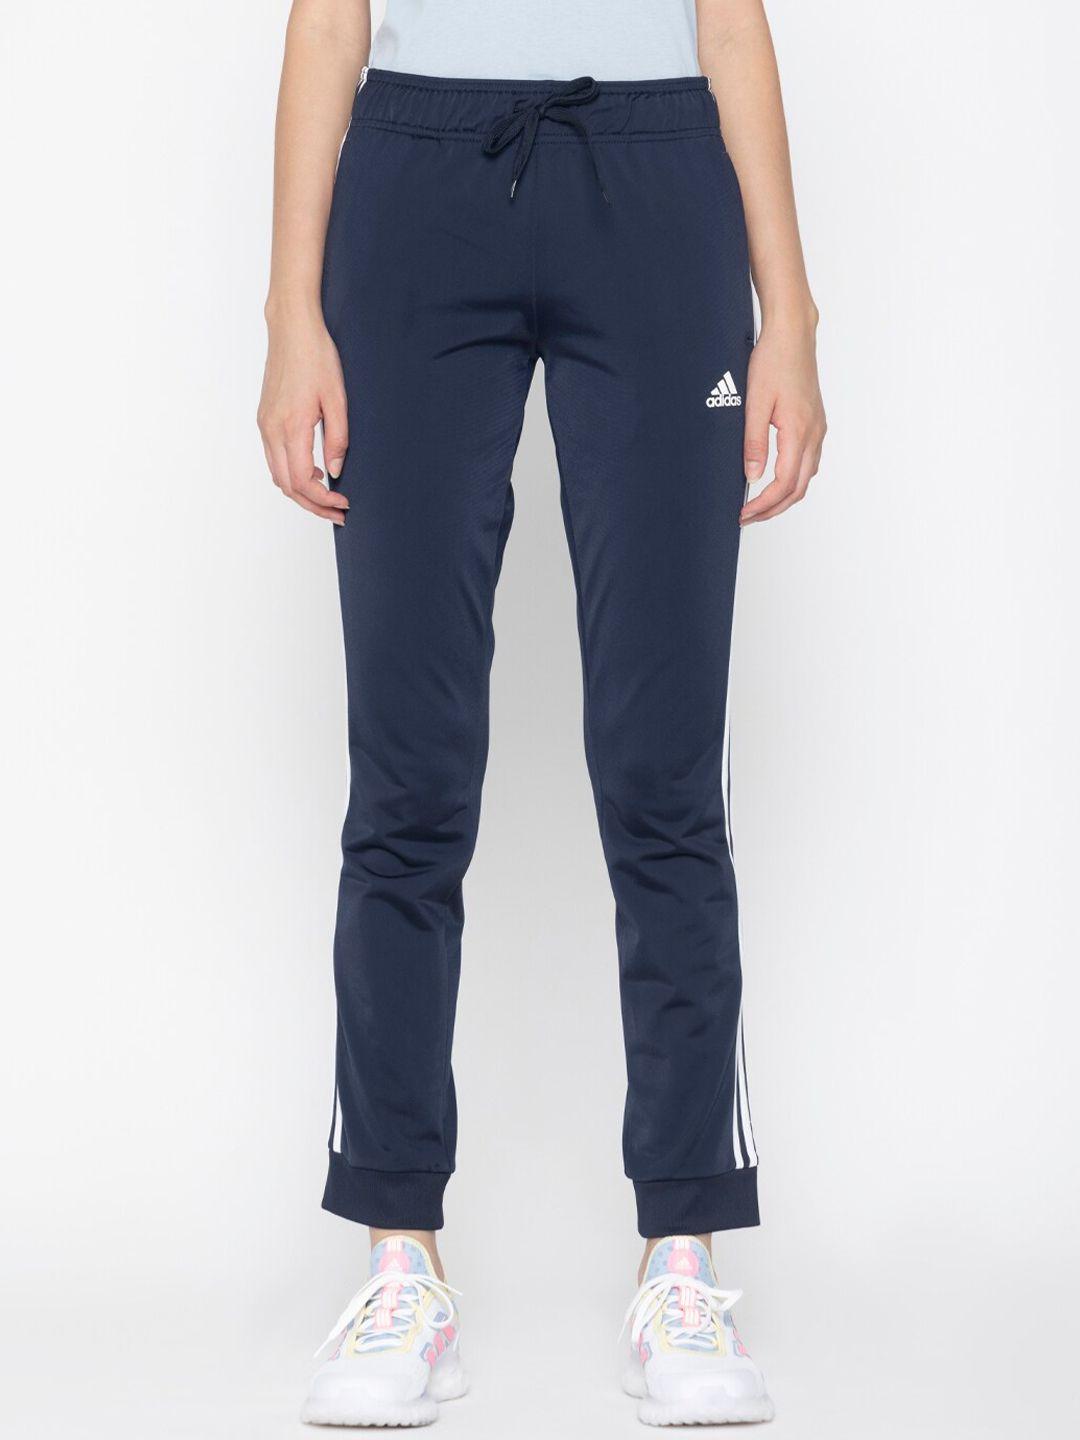 adidas w 3s tp tric women slim fit side-striped details joggers